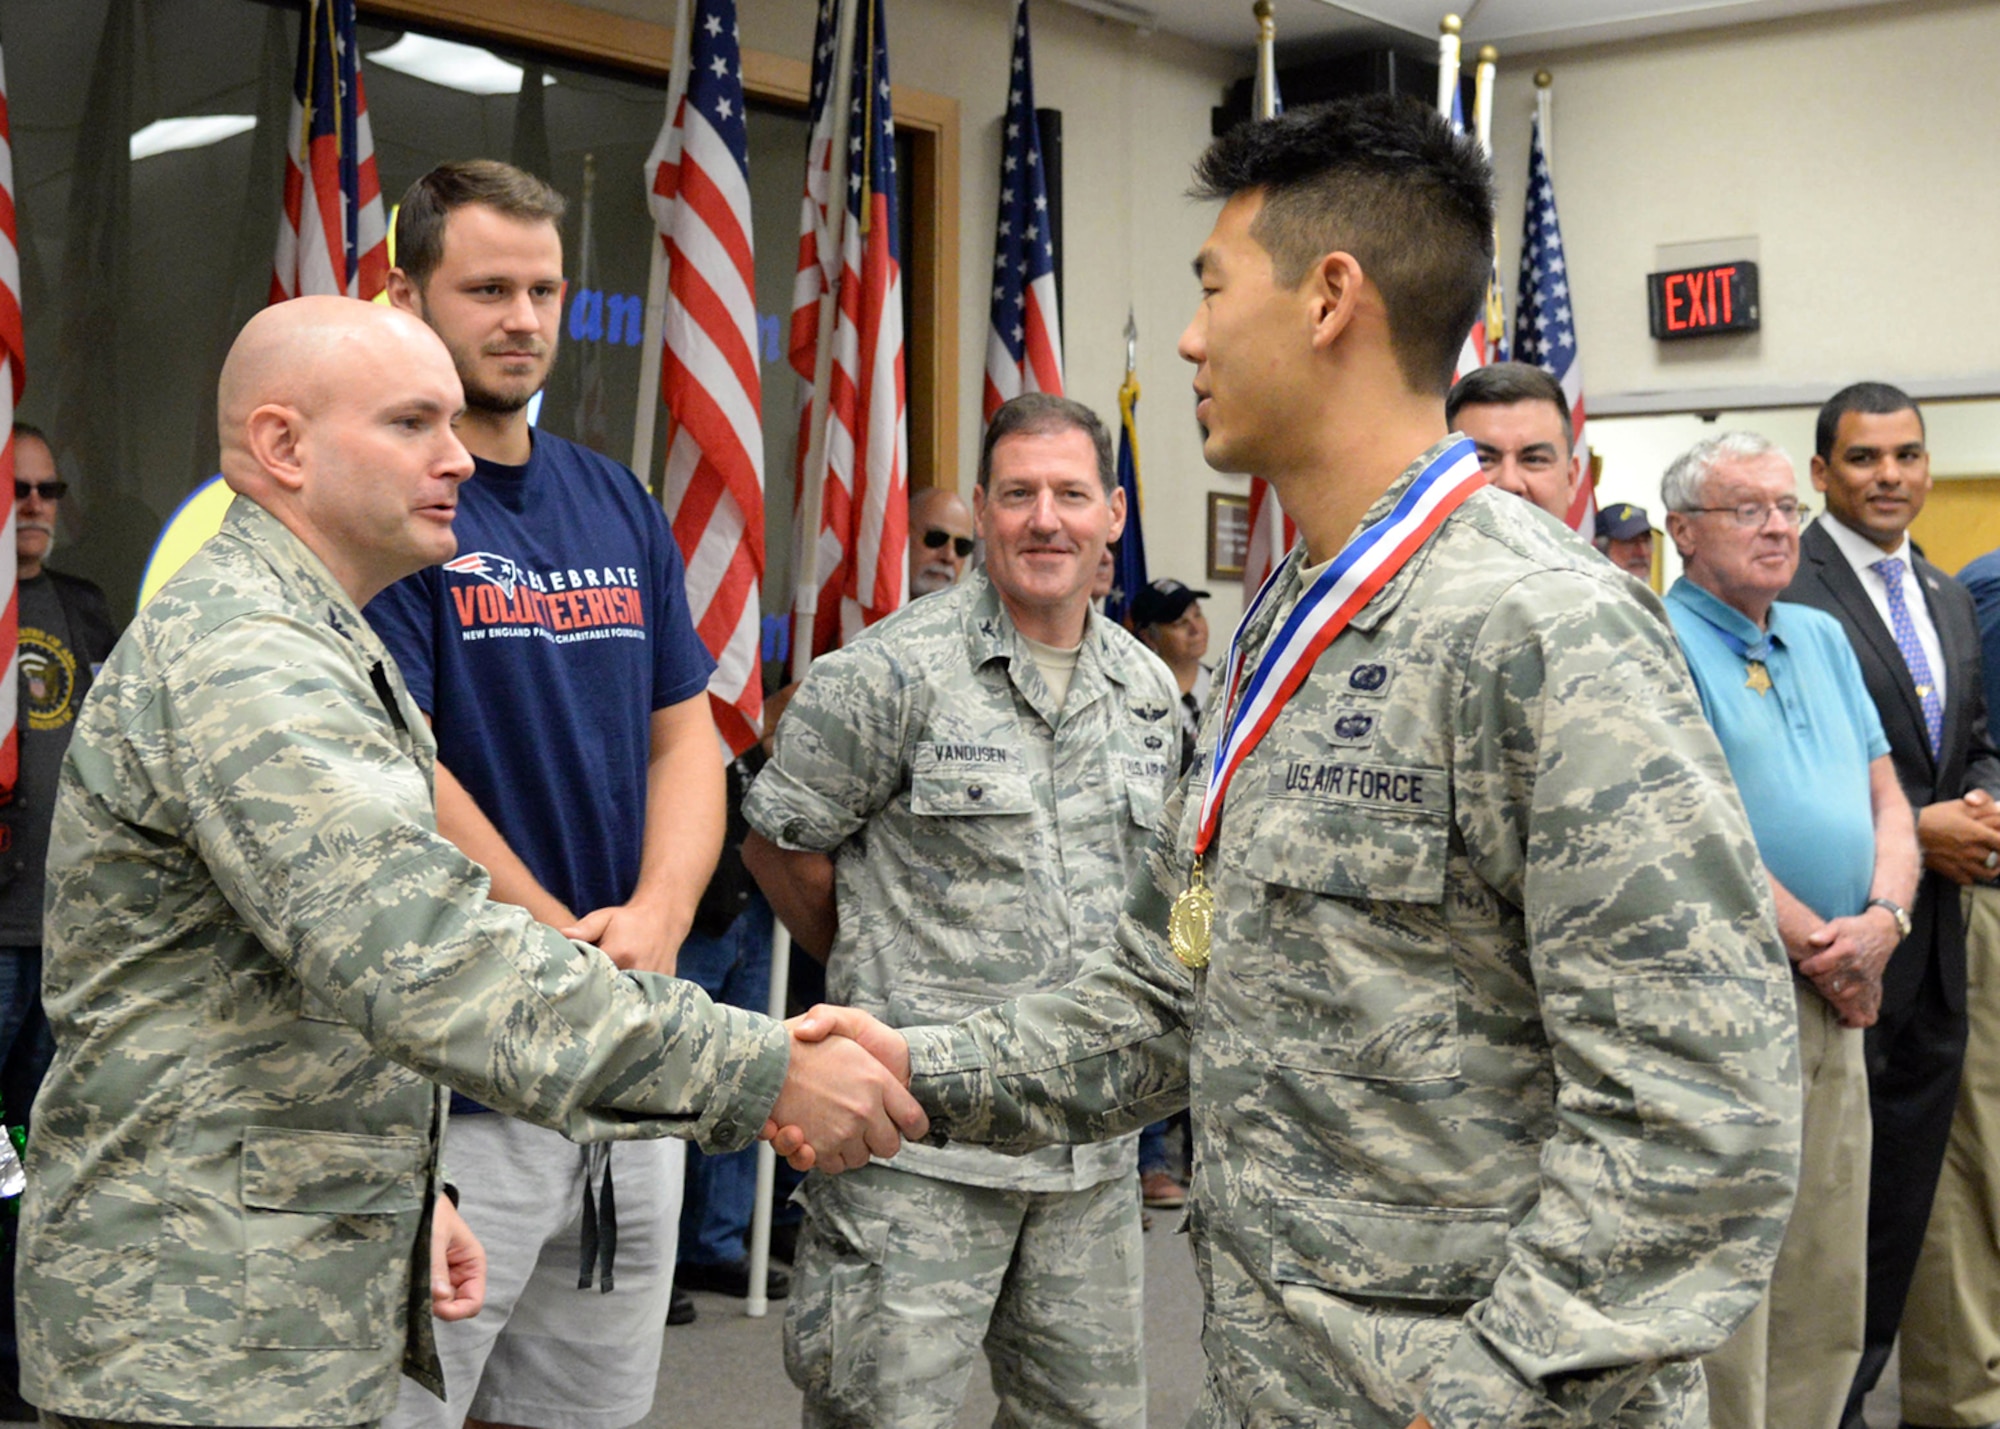 First Lt. Brian Hwang, a contracting manager for the Battle Management Air Operations Center program, is welcomed home by Col. David R. Dunklee, installation commander, during the Hanscom Heroes Homecoming medallion ceremony at the base conference center July 21. During the event, base personnel formally welcomed home military and civilian Airmen, along with their families, who have returned home from deployment in the past year. (U.S. Air Force photo by Linda LaBonte Britt)